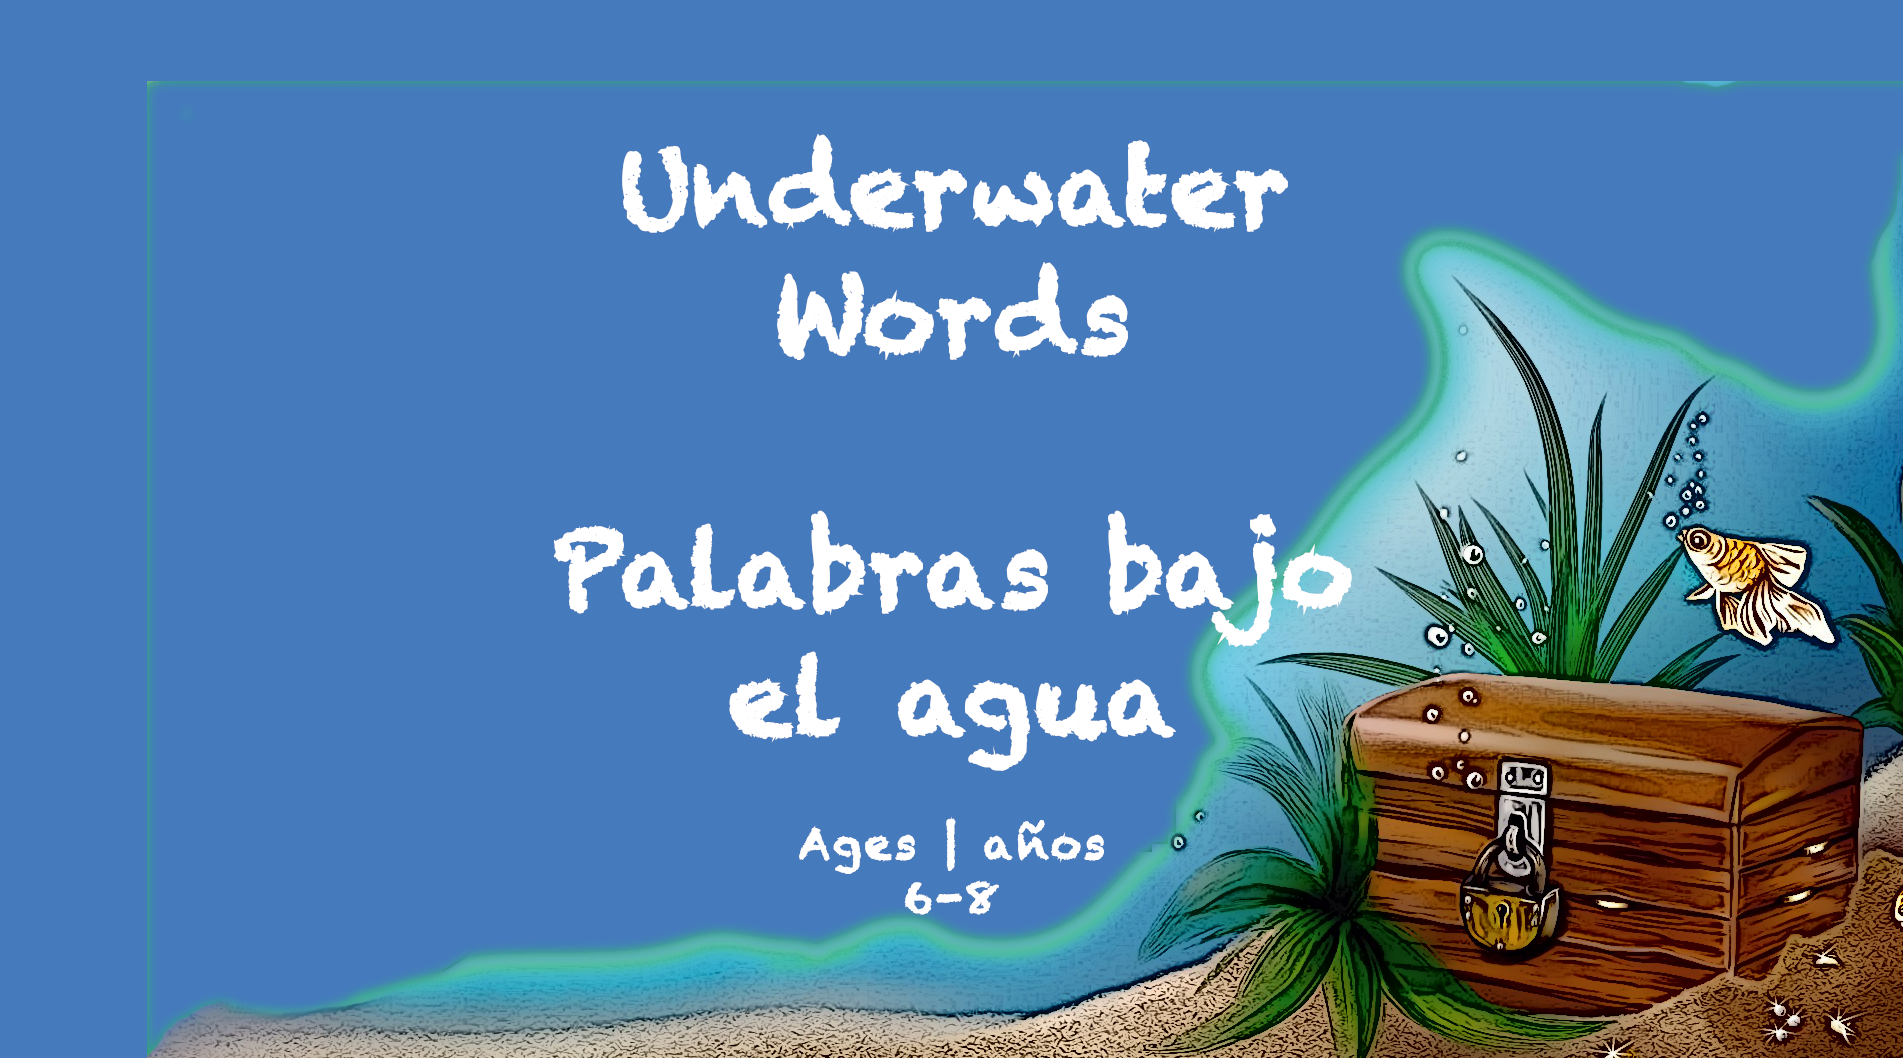 Underwater Words for 6-8 year olds